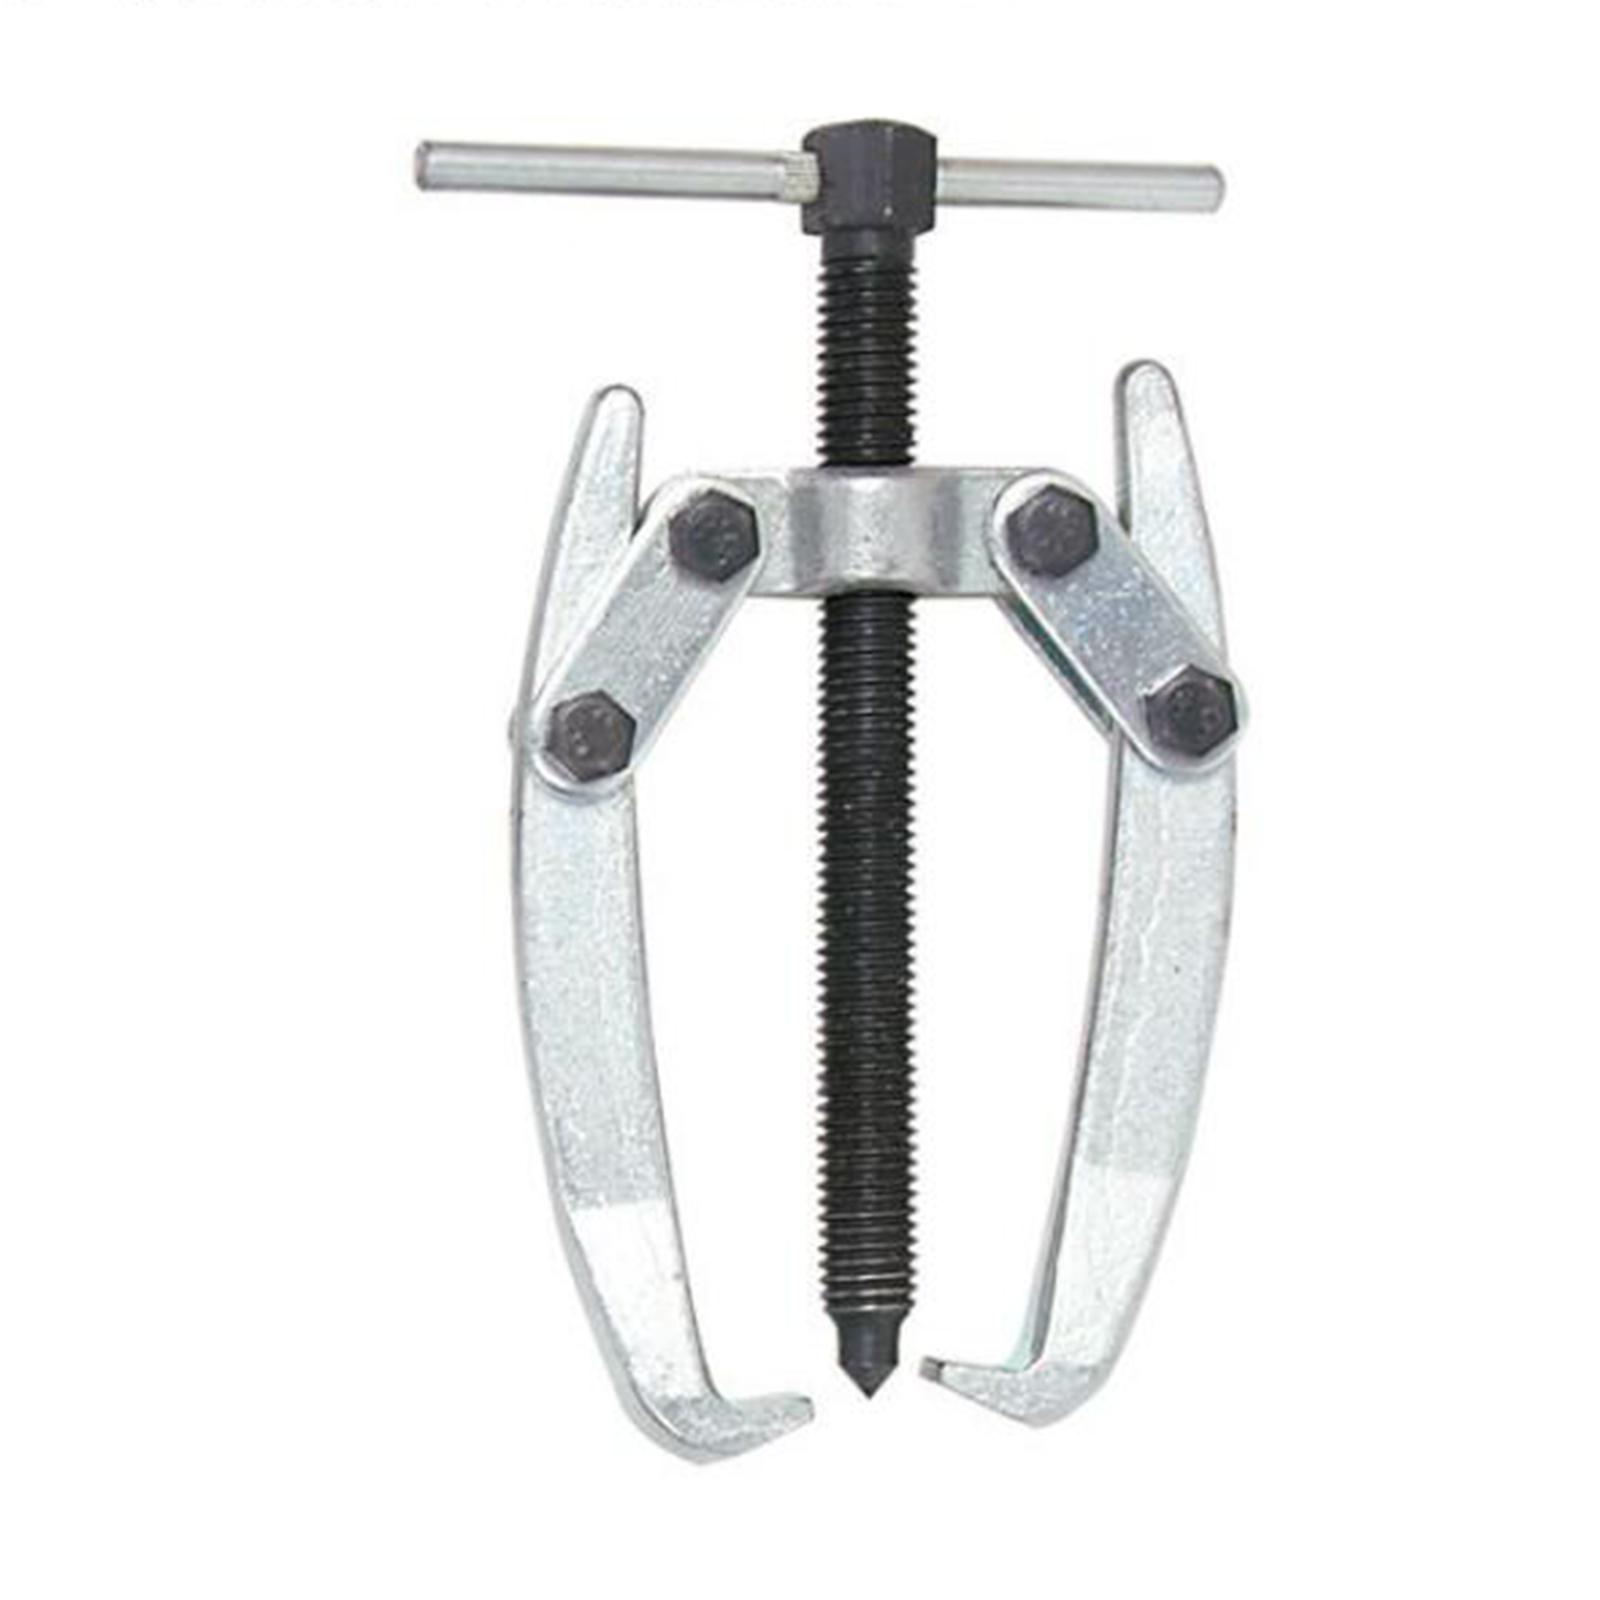 Bearing Gears Puller Jaw Puller Professional Accessories Pump Pulley Remover 3 Jaws 10 to 60mm